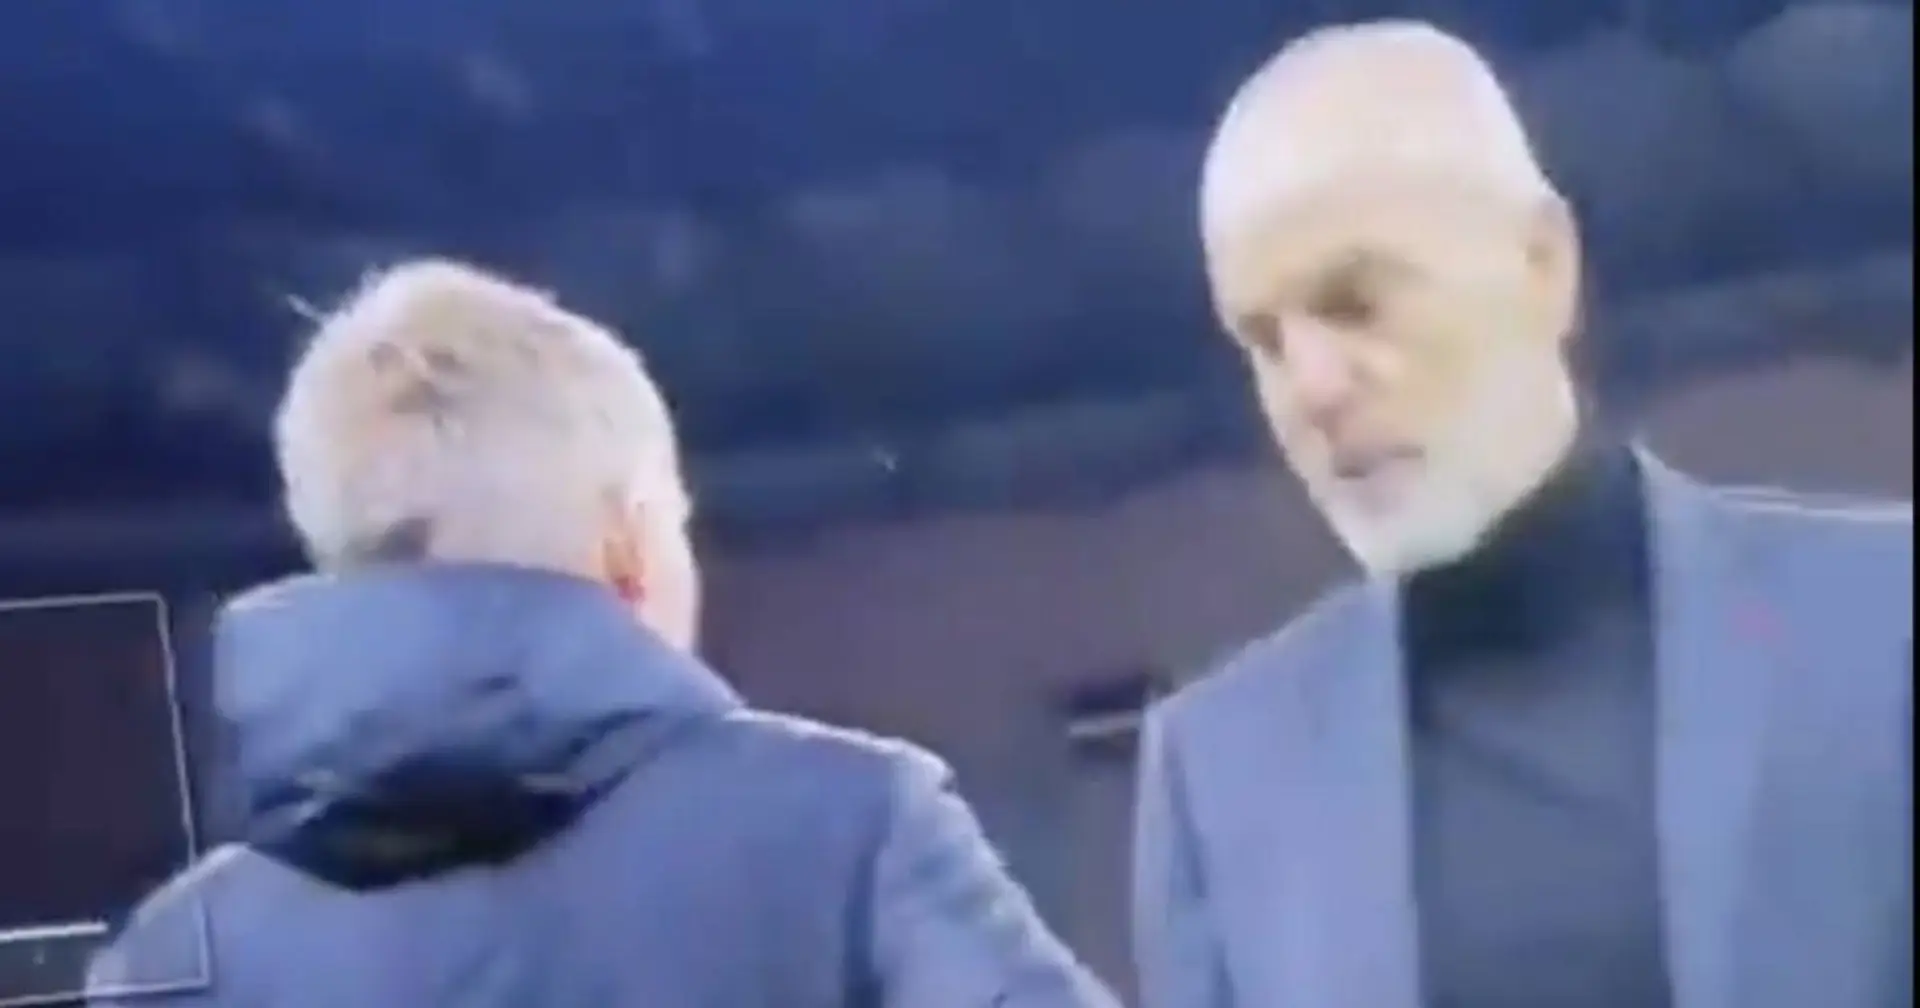 Milan boss Stefano Pioli apologises for foul-mouthed San Siro rant, insists it wasn't aimed at Solskjaer